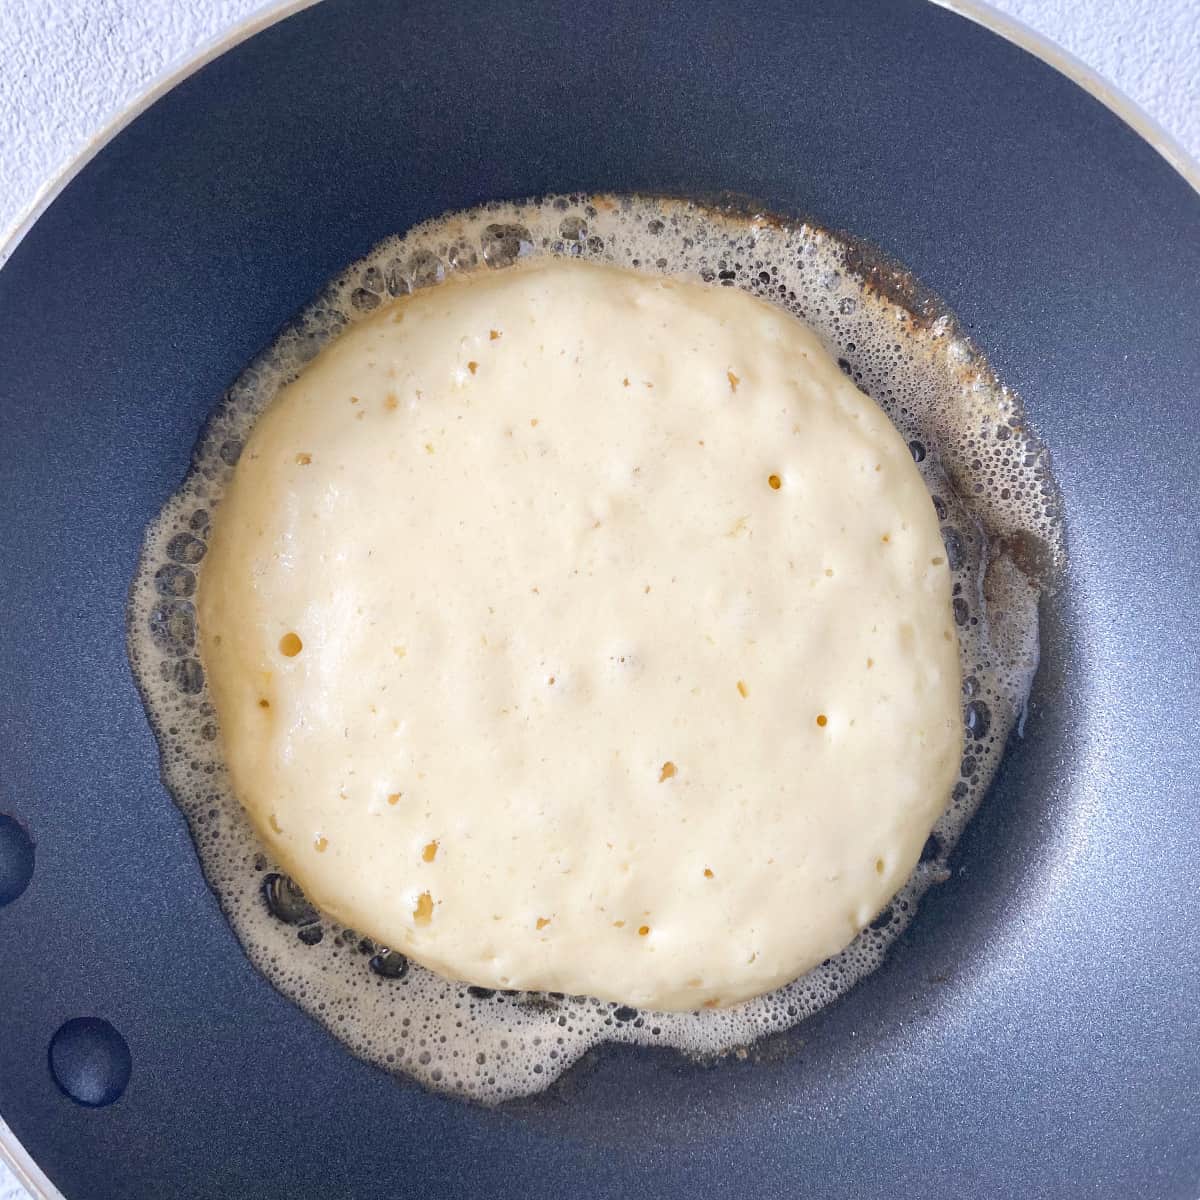 shows a perfectly bubbly olive oil buttermilk pancake that is ready to be flipped